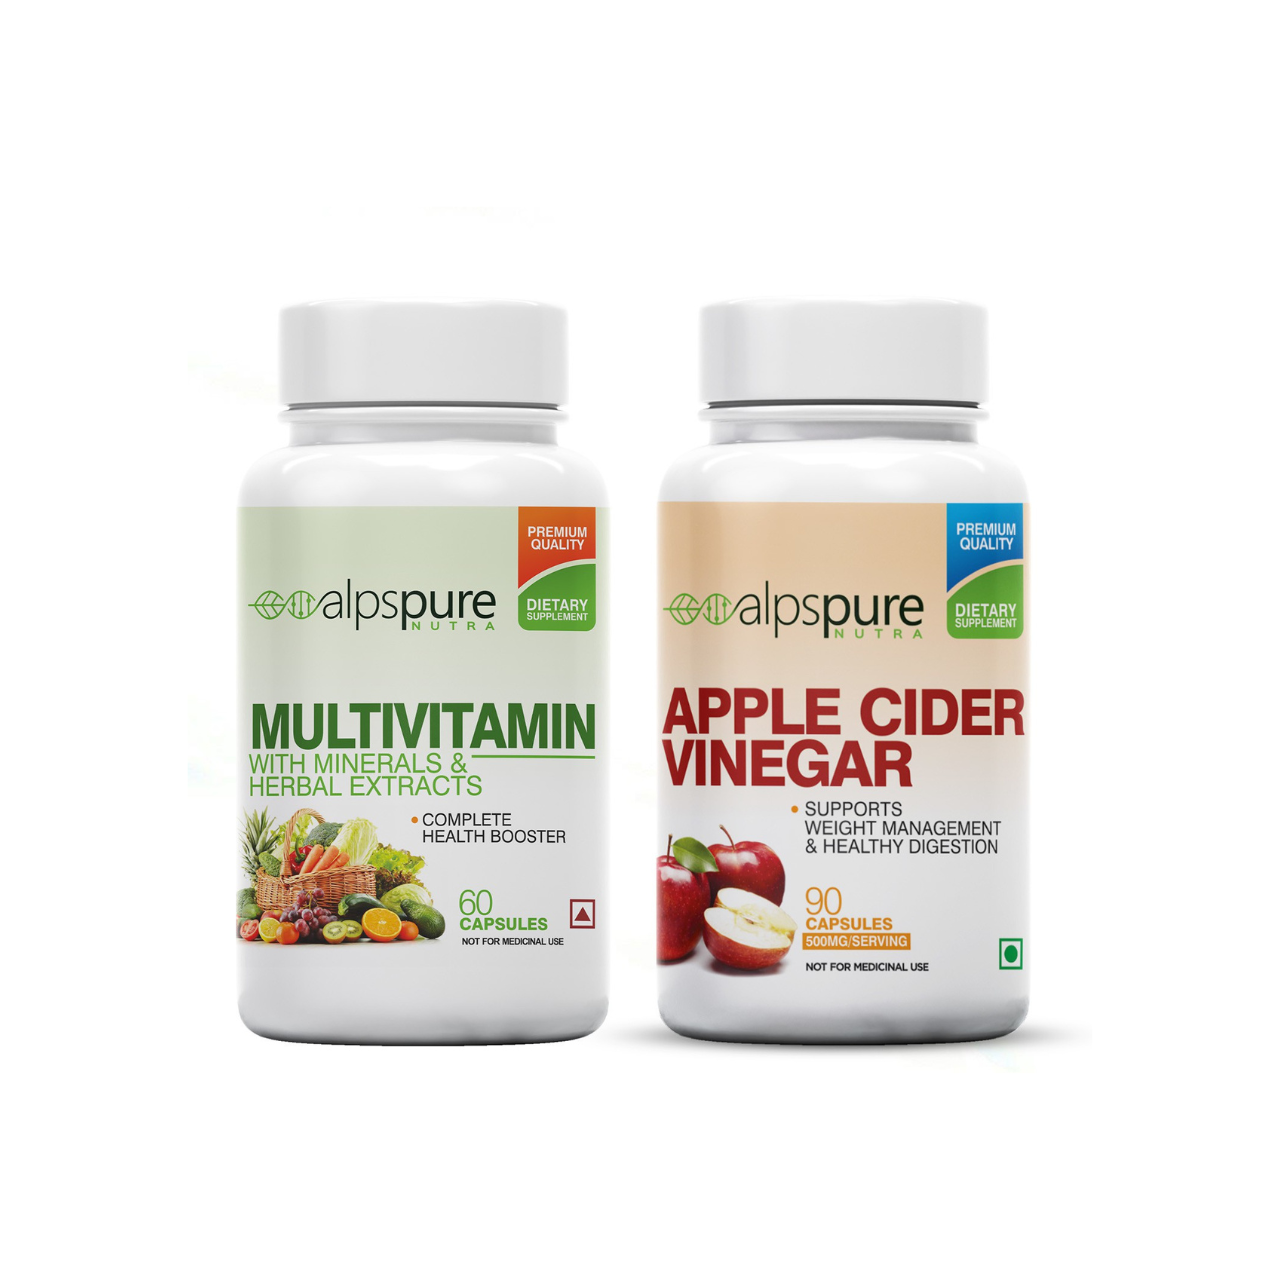 Transform Your Health with a Multivitamin and Apple Cider Vinegar Supplement: Essential Nutrients and Natural Remedies